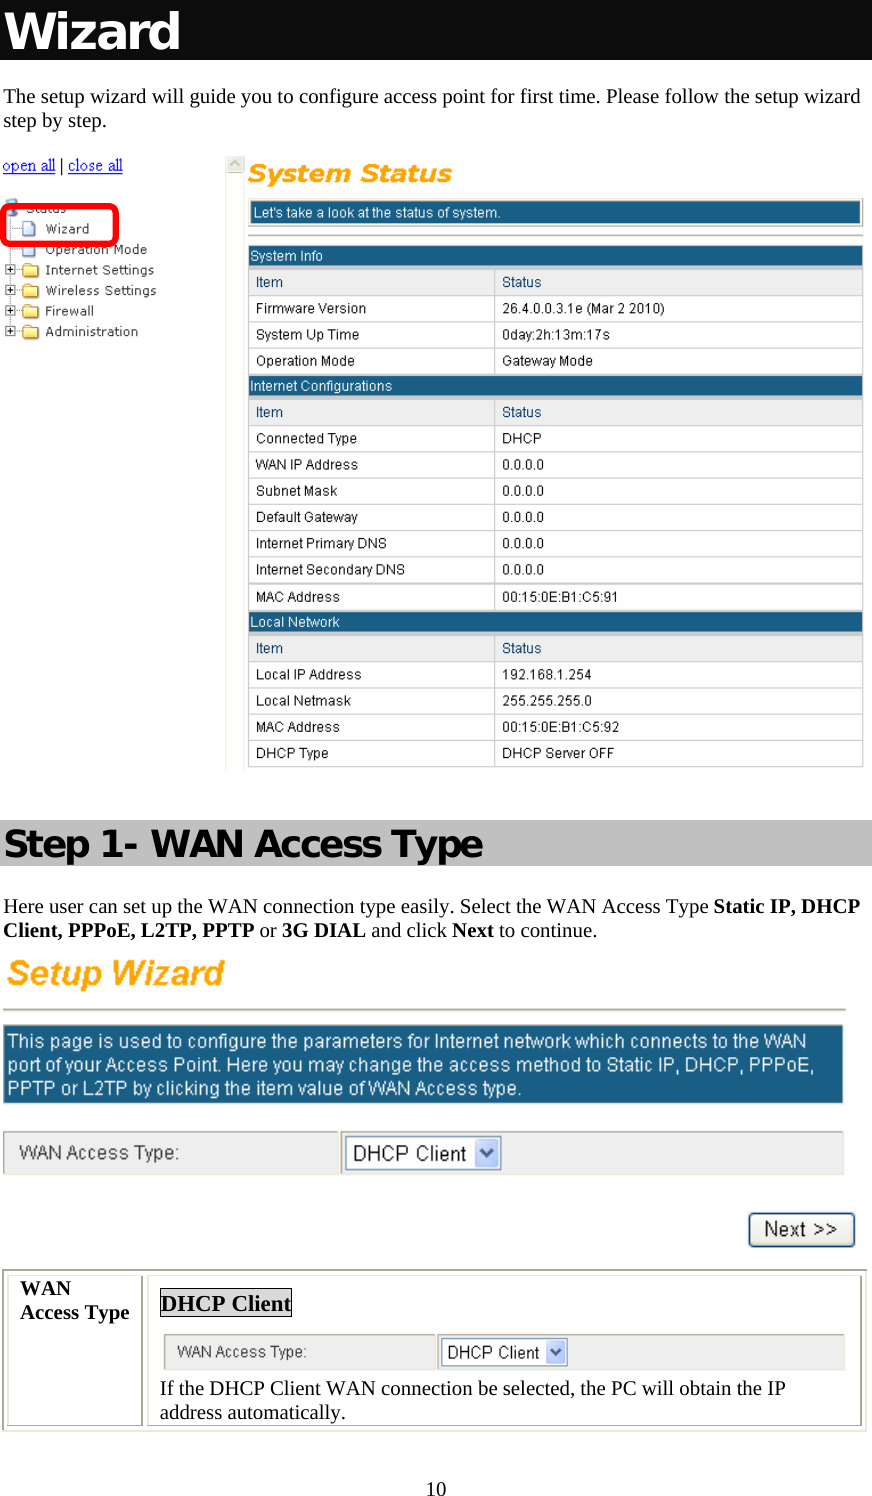   10Wizard  The setup wizard will guide you to configure access point for first time. Please follow the setup wizard step by step.     Step 1- WAN Access Type Here user can set up the WAN connection type easily. Select the WAN Access Type Static IP, DHCP Client, PPPoE, L2TP, PPTP or 3G DIAL and click Next to continue.  WAN Access Type  DHCP Client If the DHCP Client WAN connection be selected, the PC will obtain the IP address automatically. 